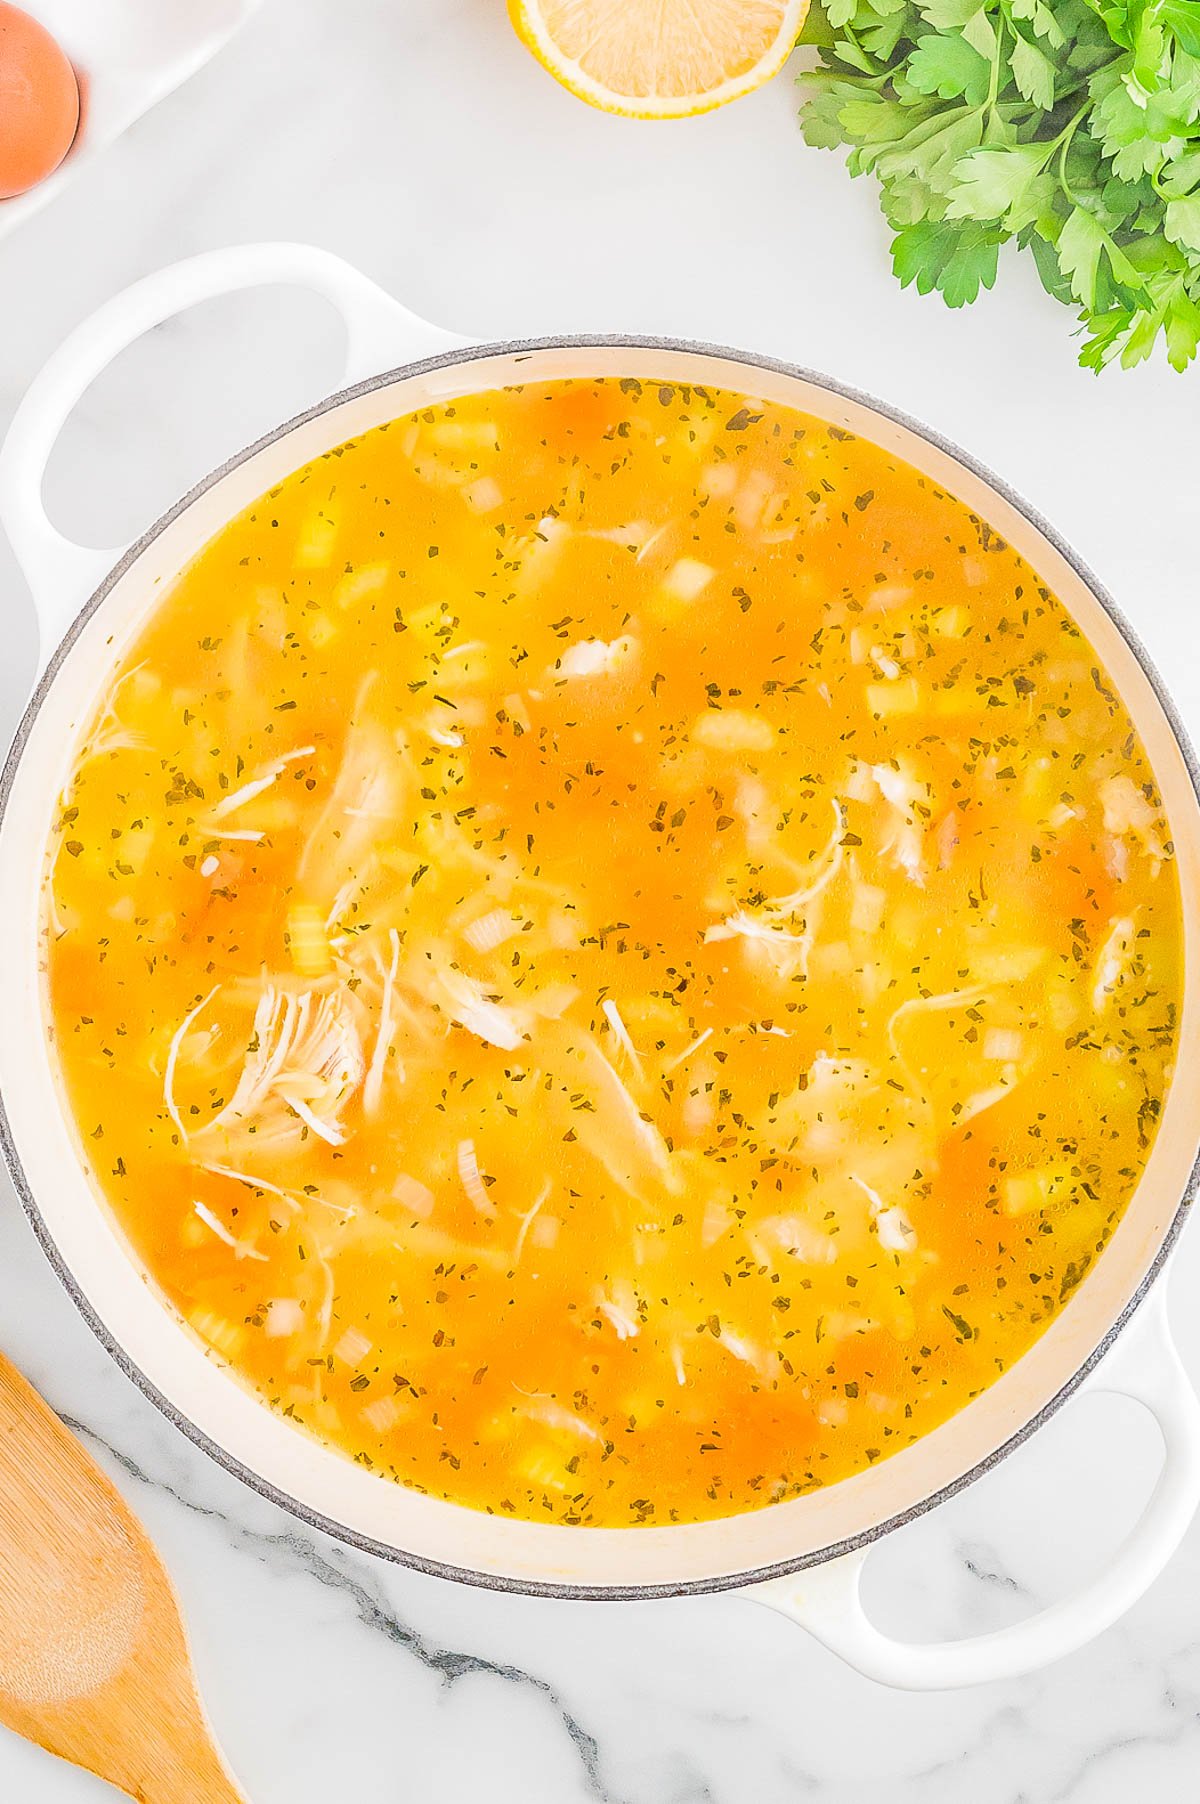 Lemon Chicken Soup - Learn to make this EASY Greek lemon chicken soup (avgolemono) at home! Made in one bowl and ready in just about 30 minutes, this creamy and comforting soup can be made with either orzo or rice. It's rich and luscious without being thick or heavy thanks to the burst of lovely fresh lemon flavor!